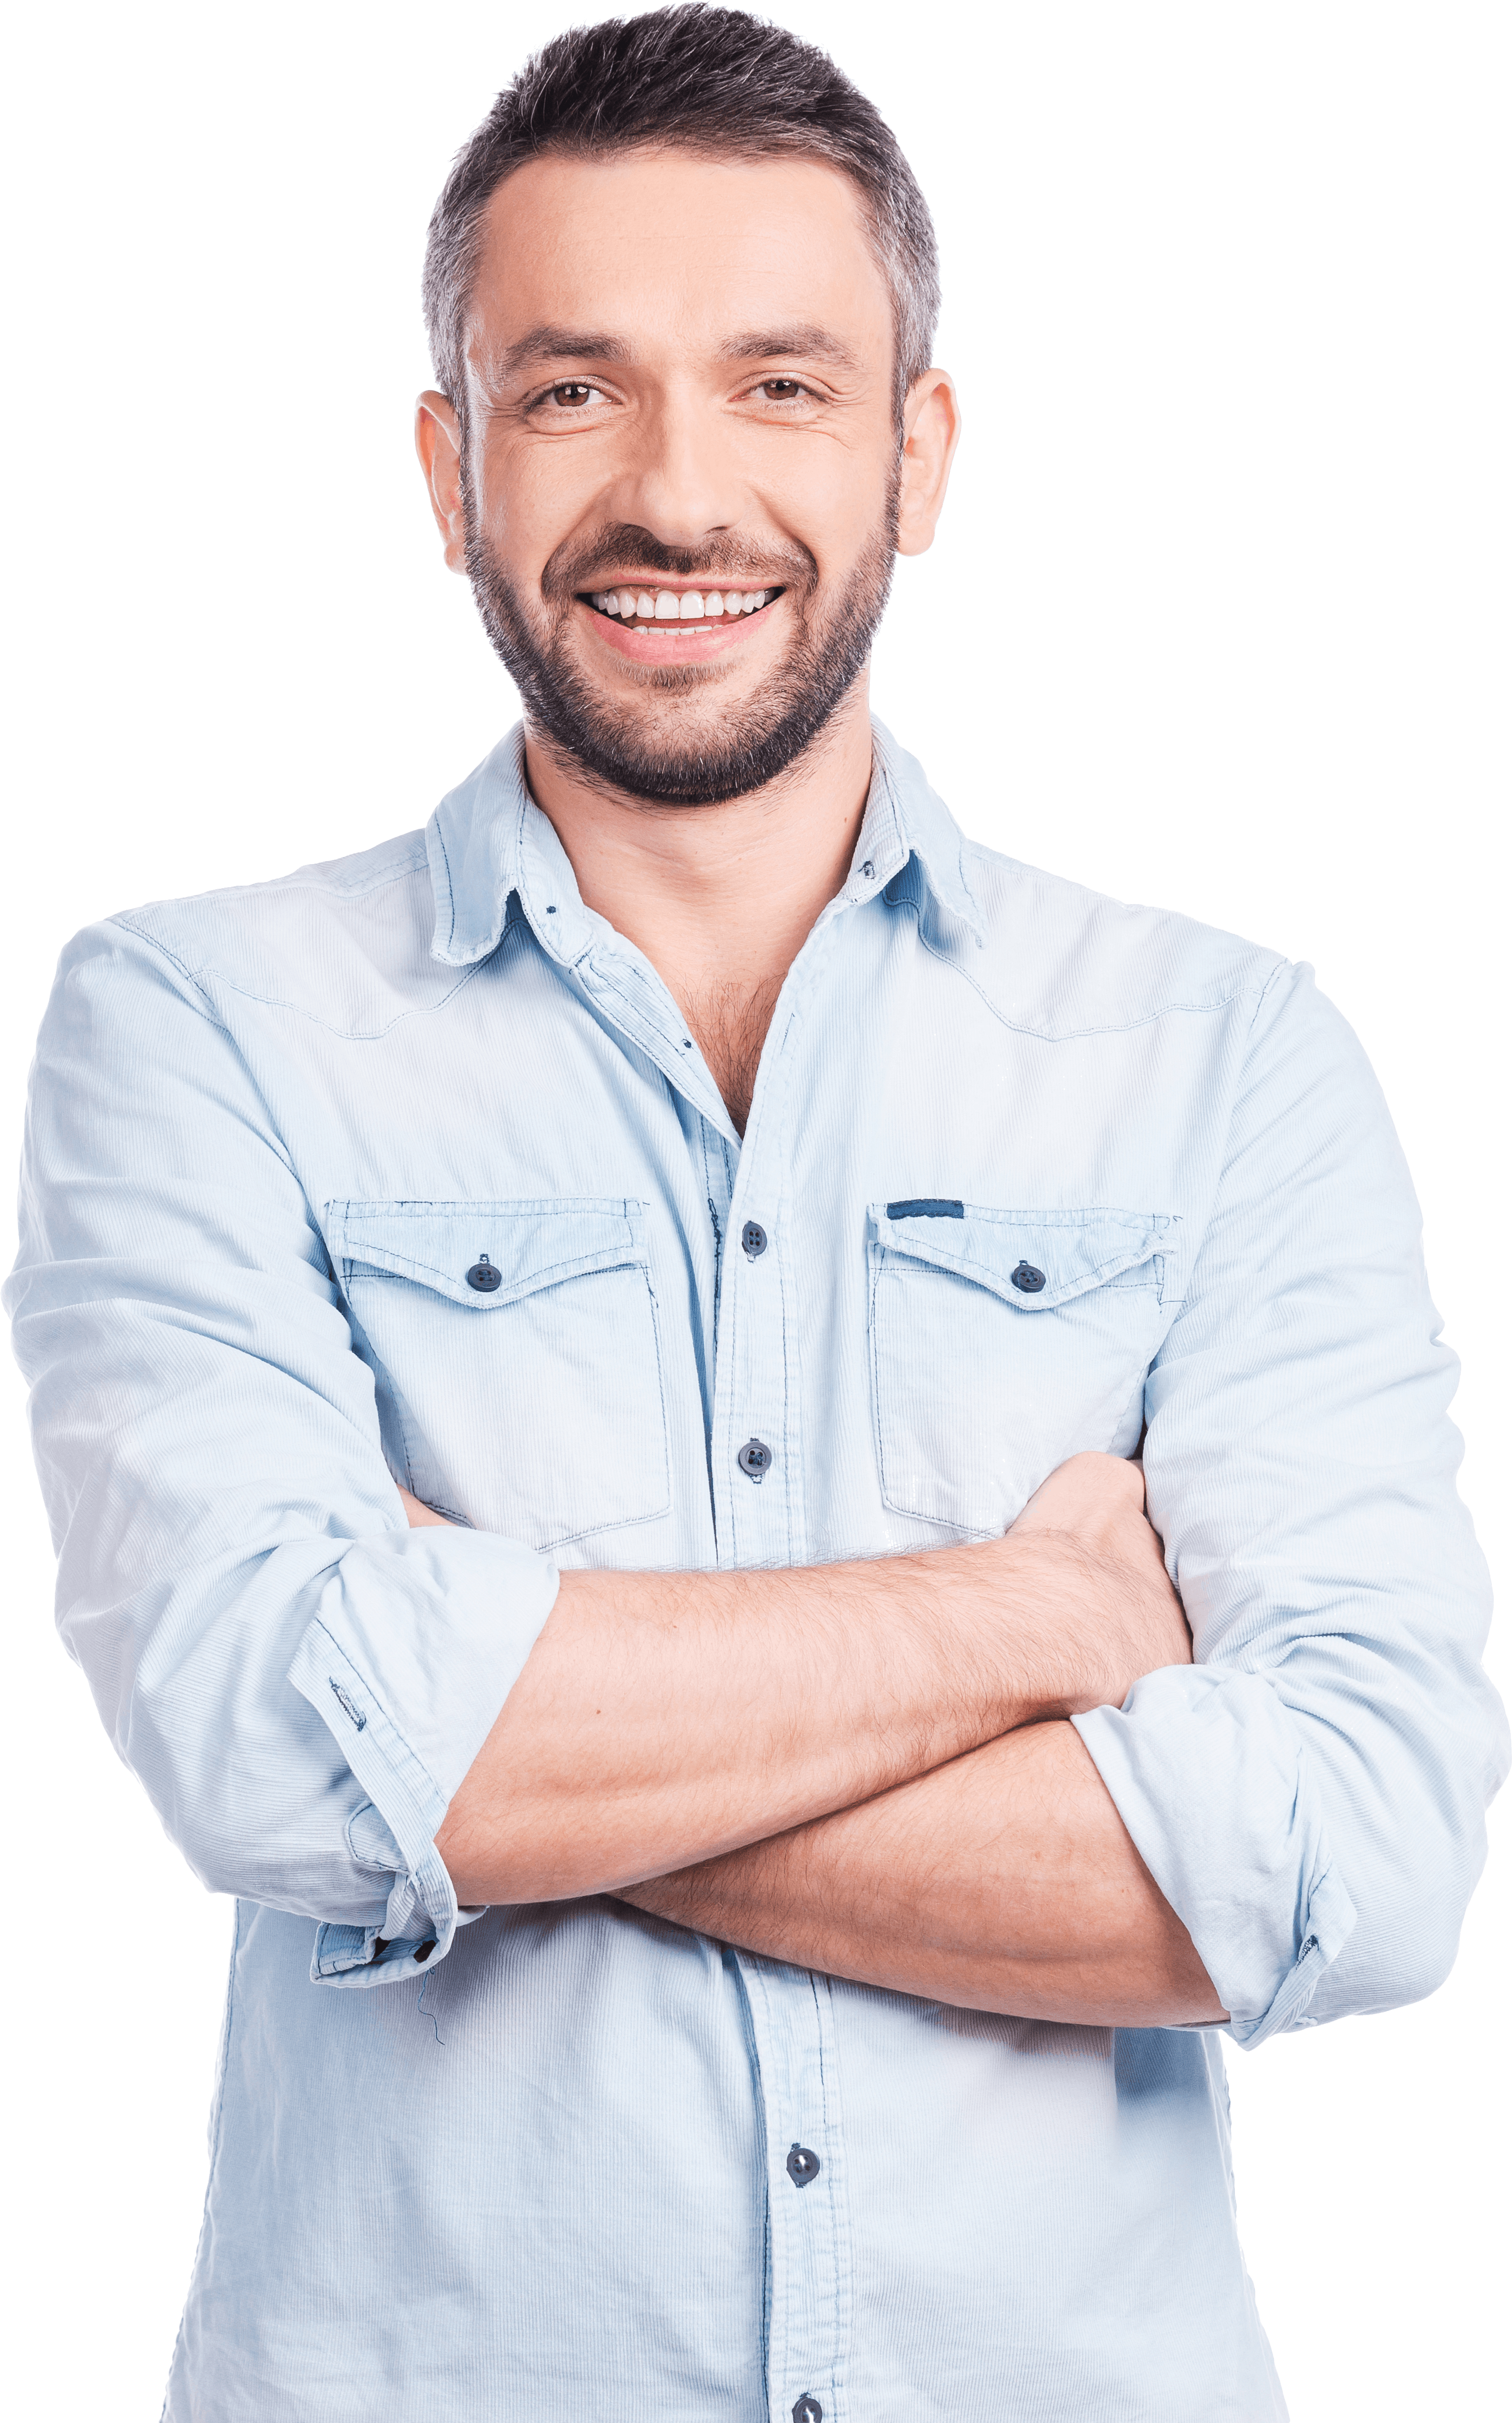 Man smiling with crossed arms